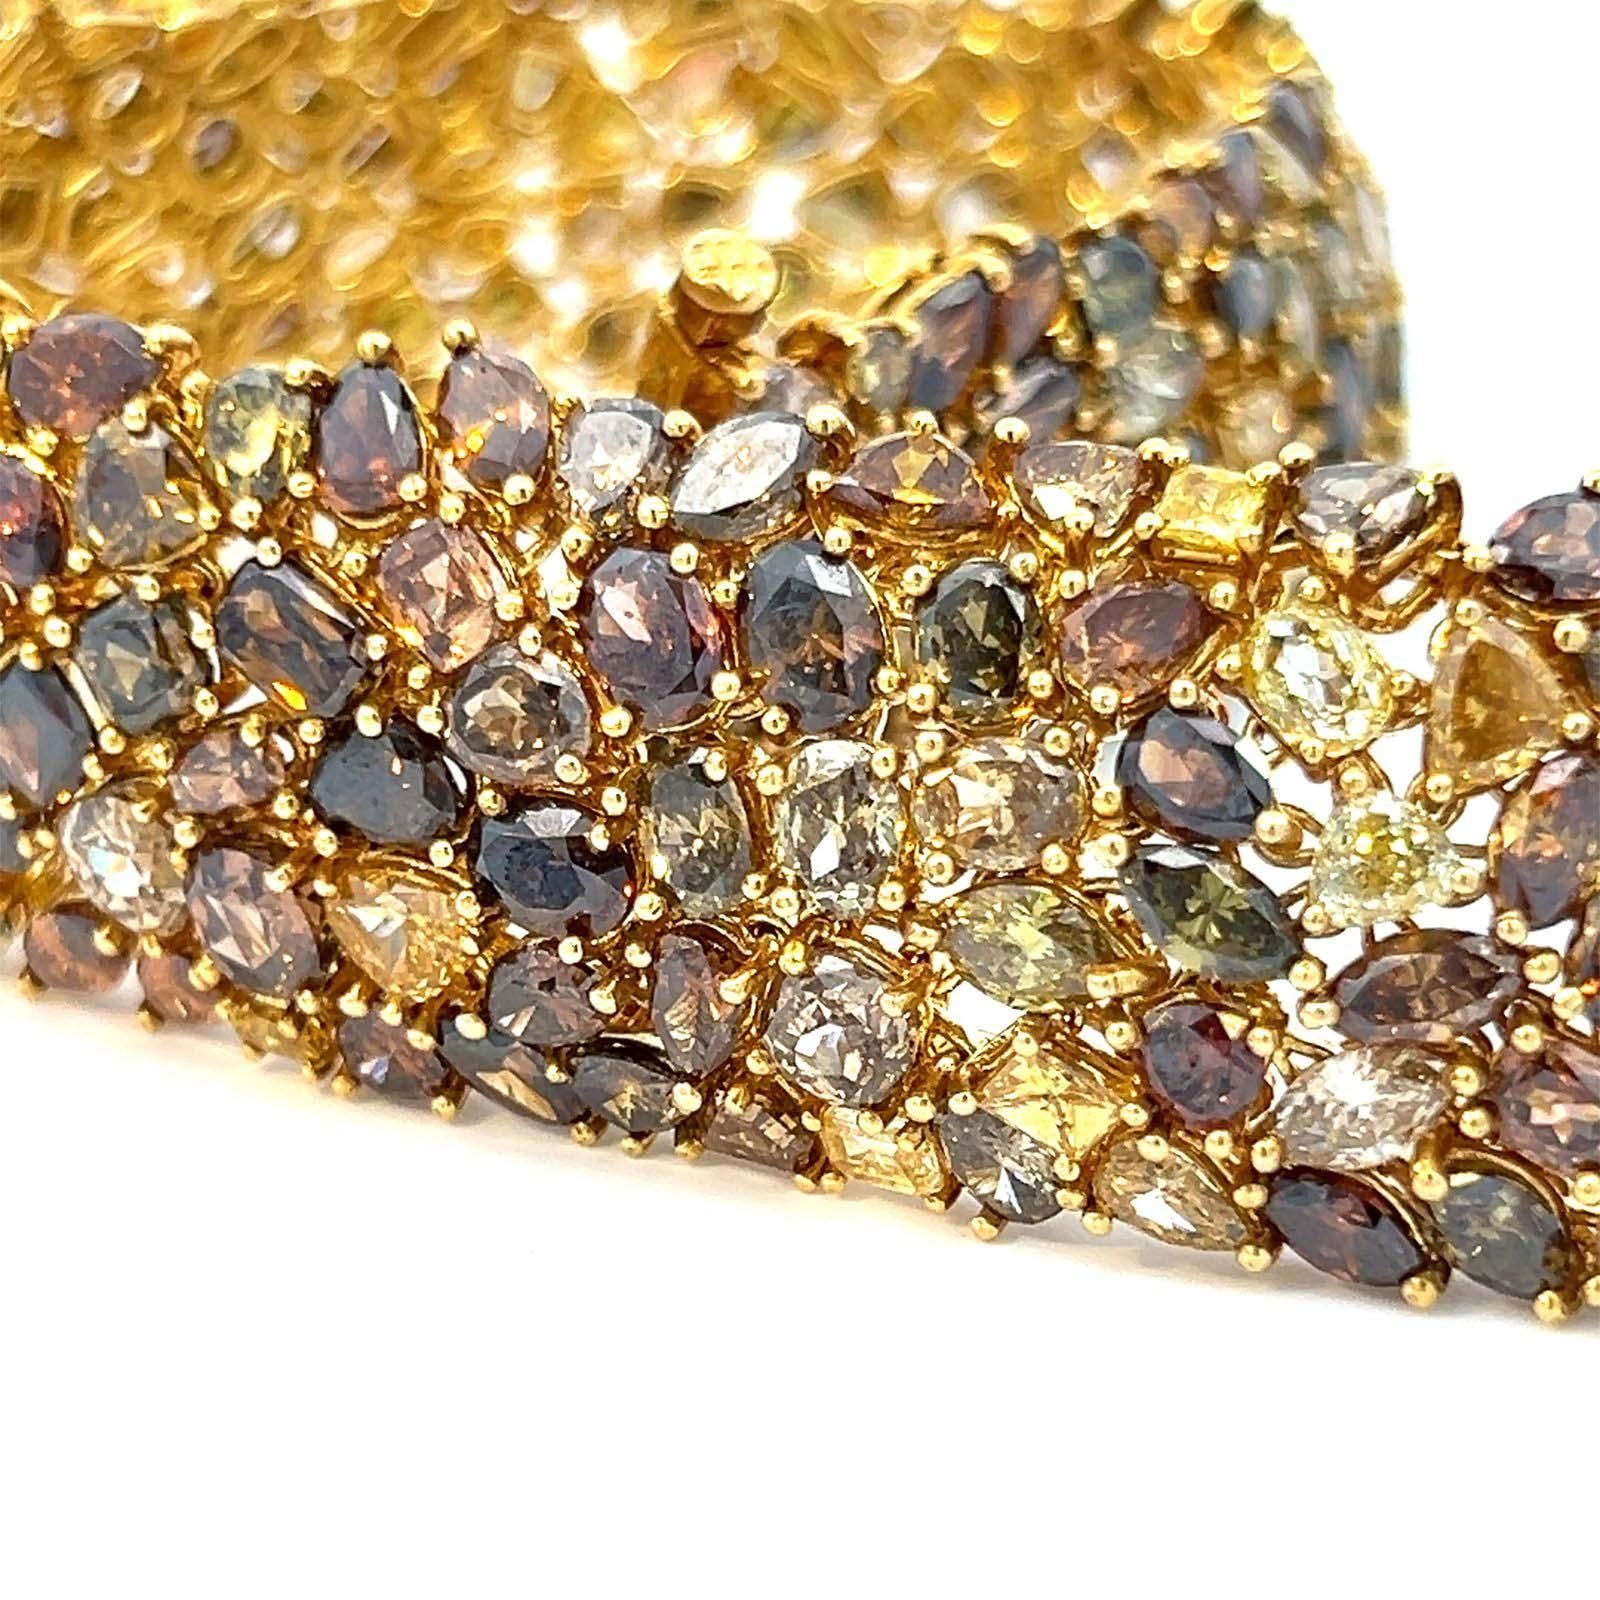 18 karat yellow gold bracelet with an astounding 67.25 carats of multi-fancy color diamonds. Crafted with meticulous attention to detail, this one-of-a-kind piece boasts a captivating array of 235 yellow, orange, brown, and green diamonds in various